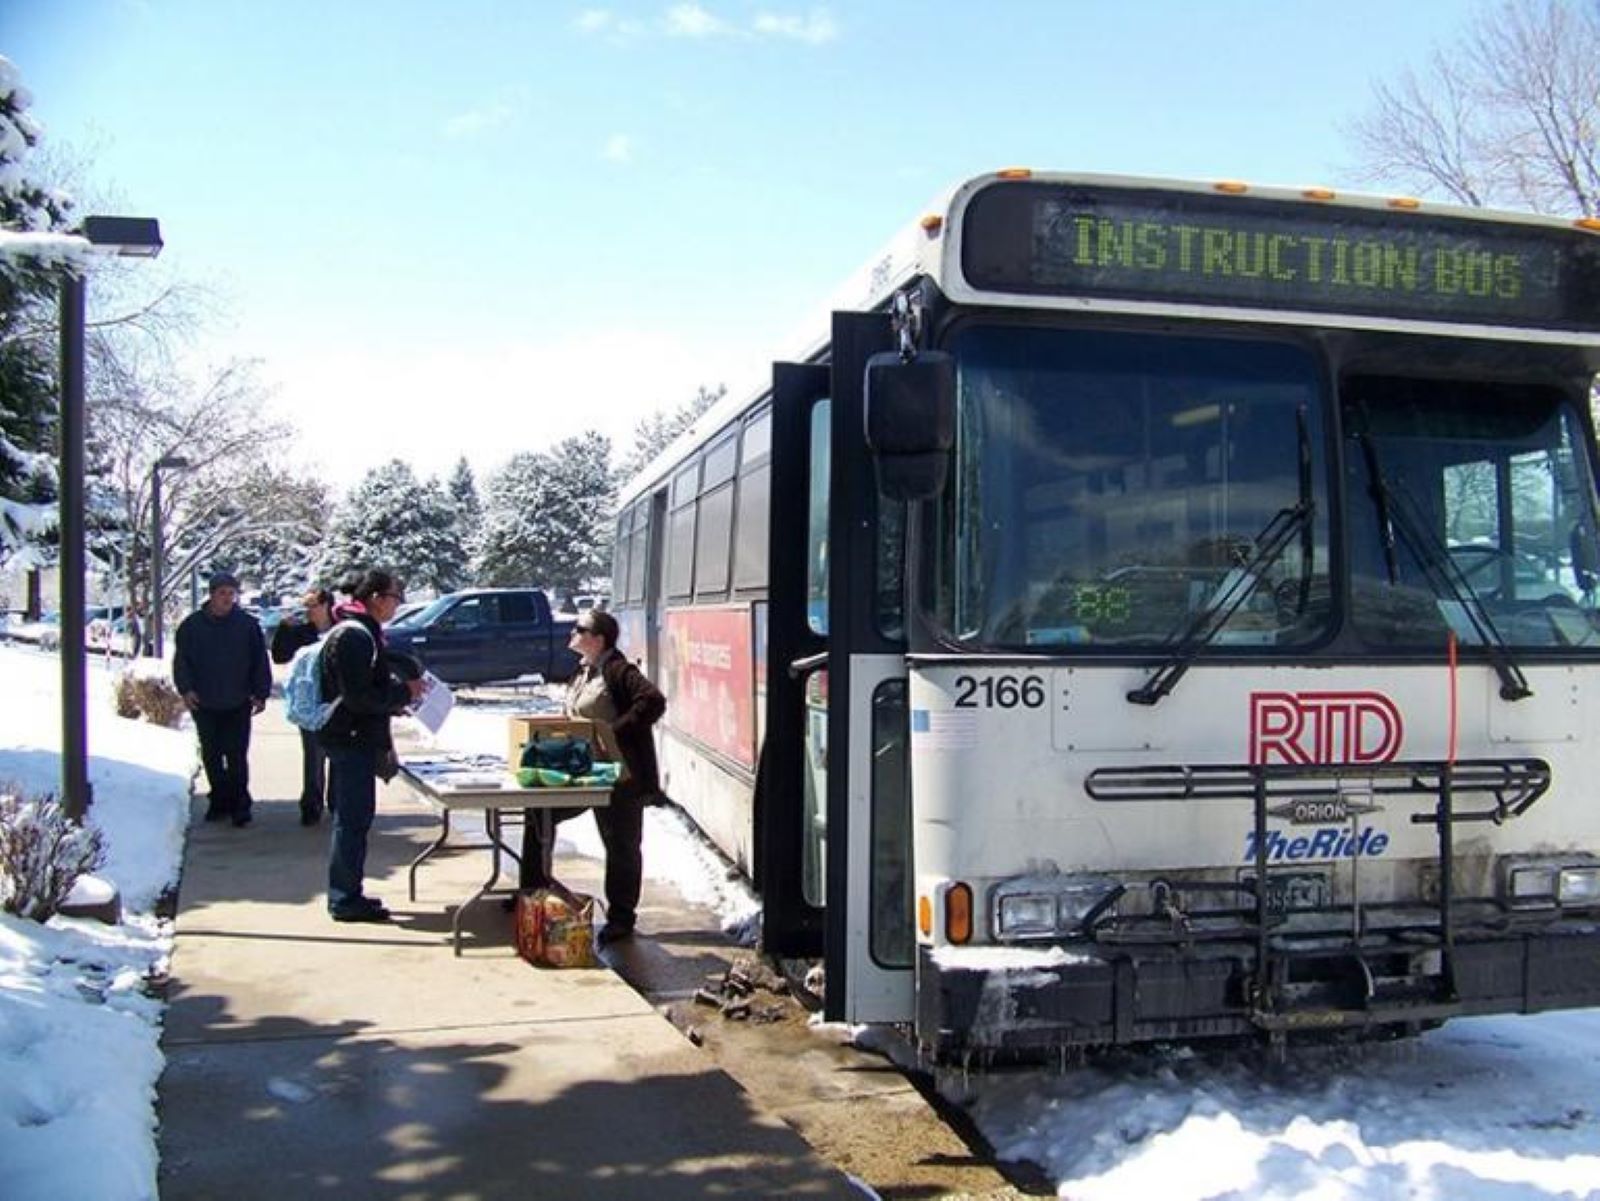 A Regional Transportation Bus picking up a group of commuters in Boulder county.